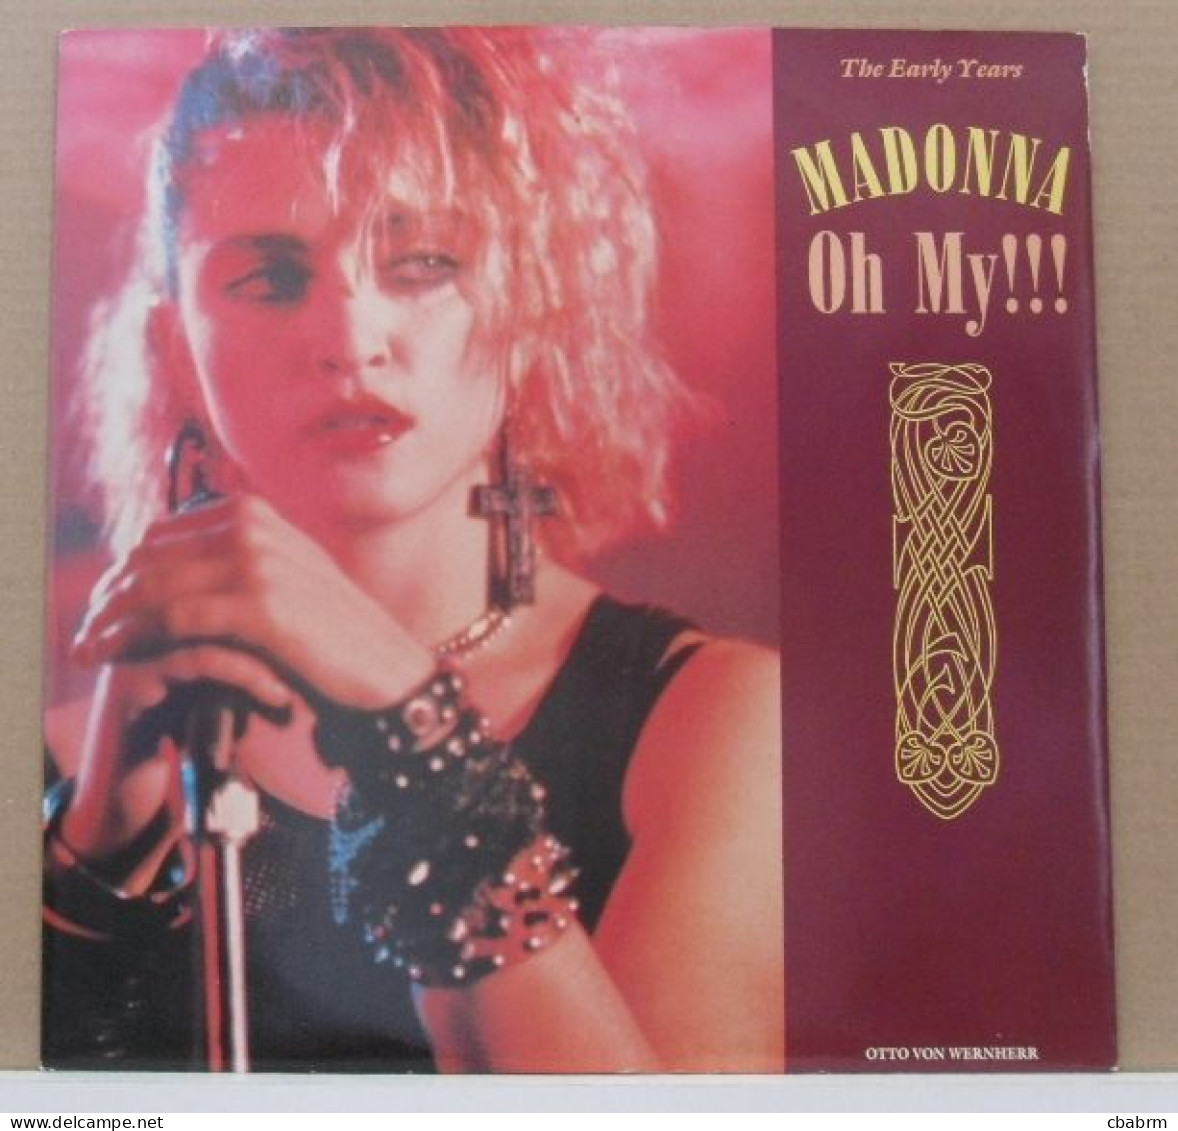 MAXI 45 TOURS MADONNA OH MY !!! - MADE IN UK REPLAY 3009 - 45 Rpm - Maxi-Singles